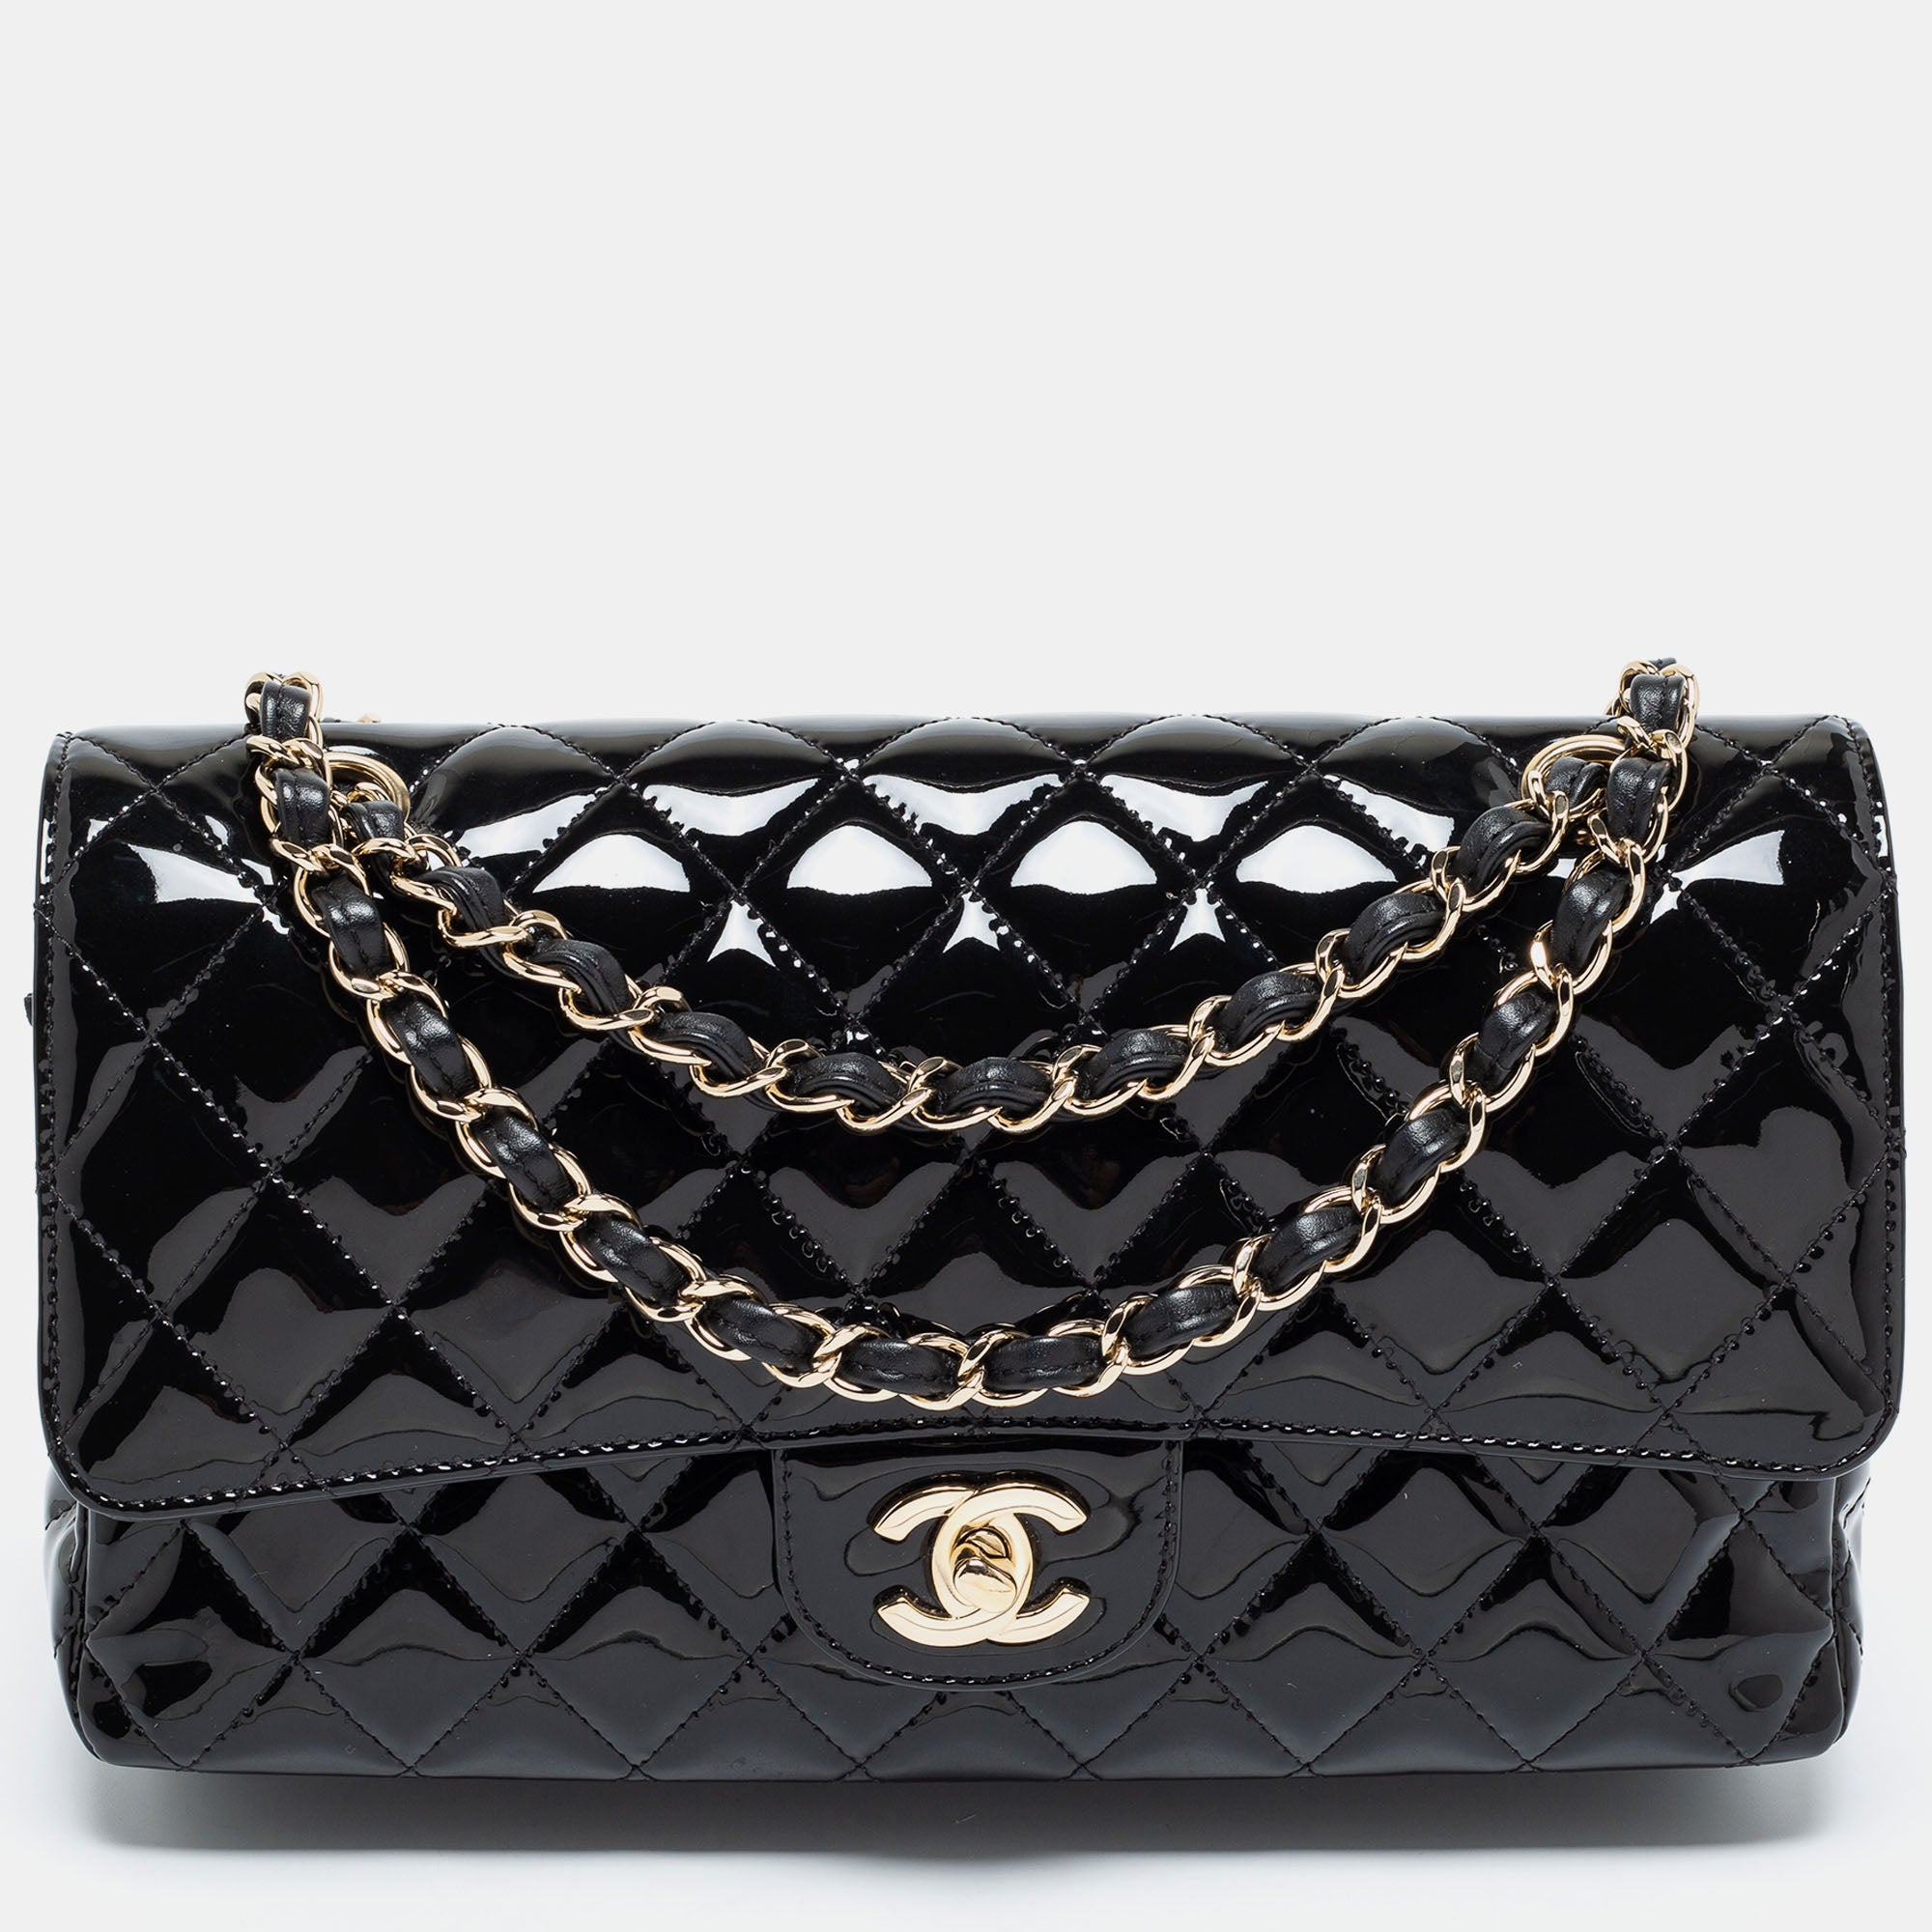 Only 1878.00 usd for CHANEL Classic Medium Double Flap Patent